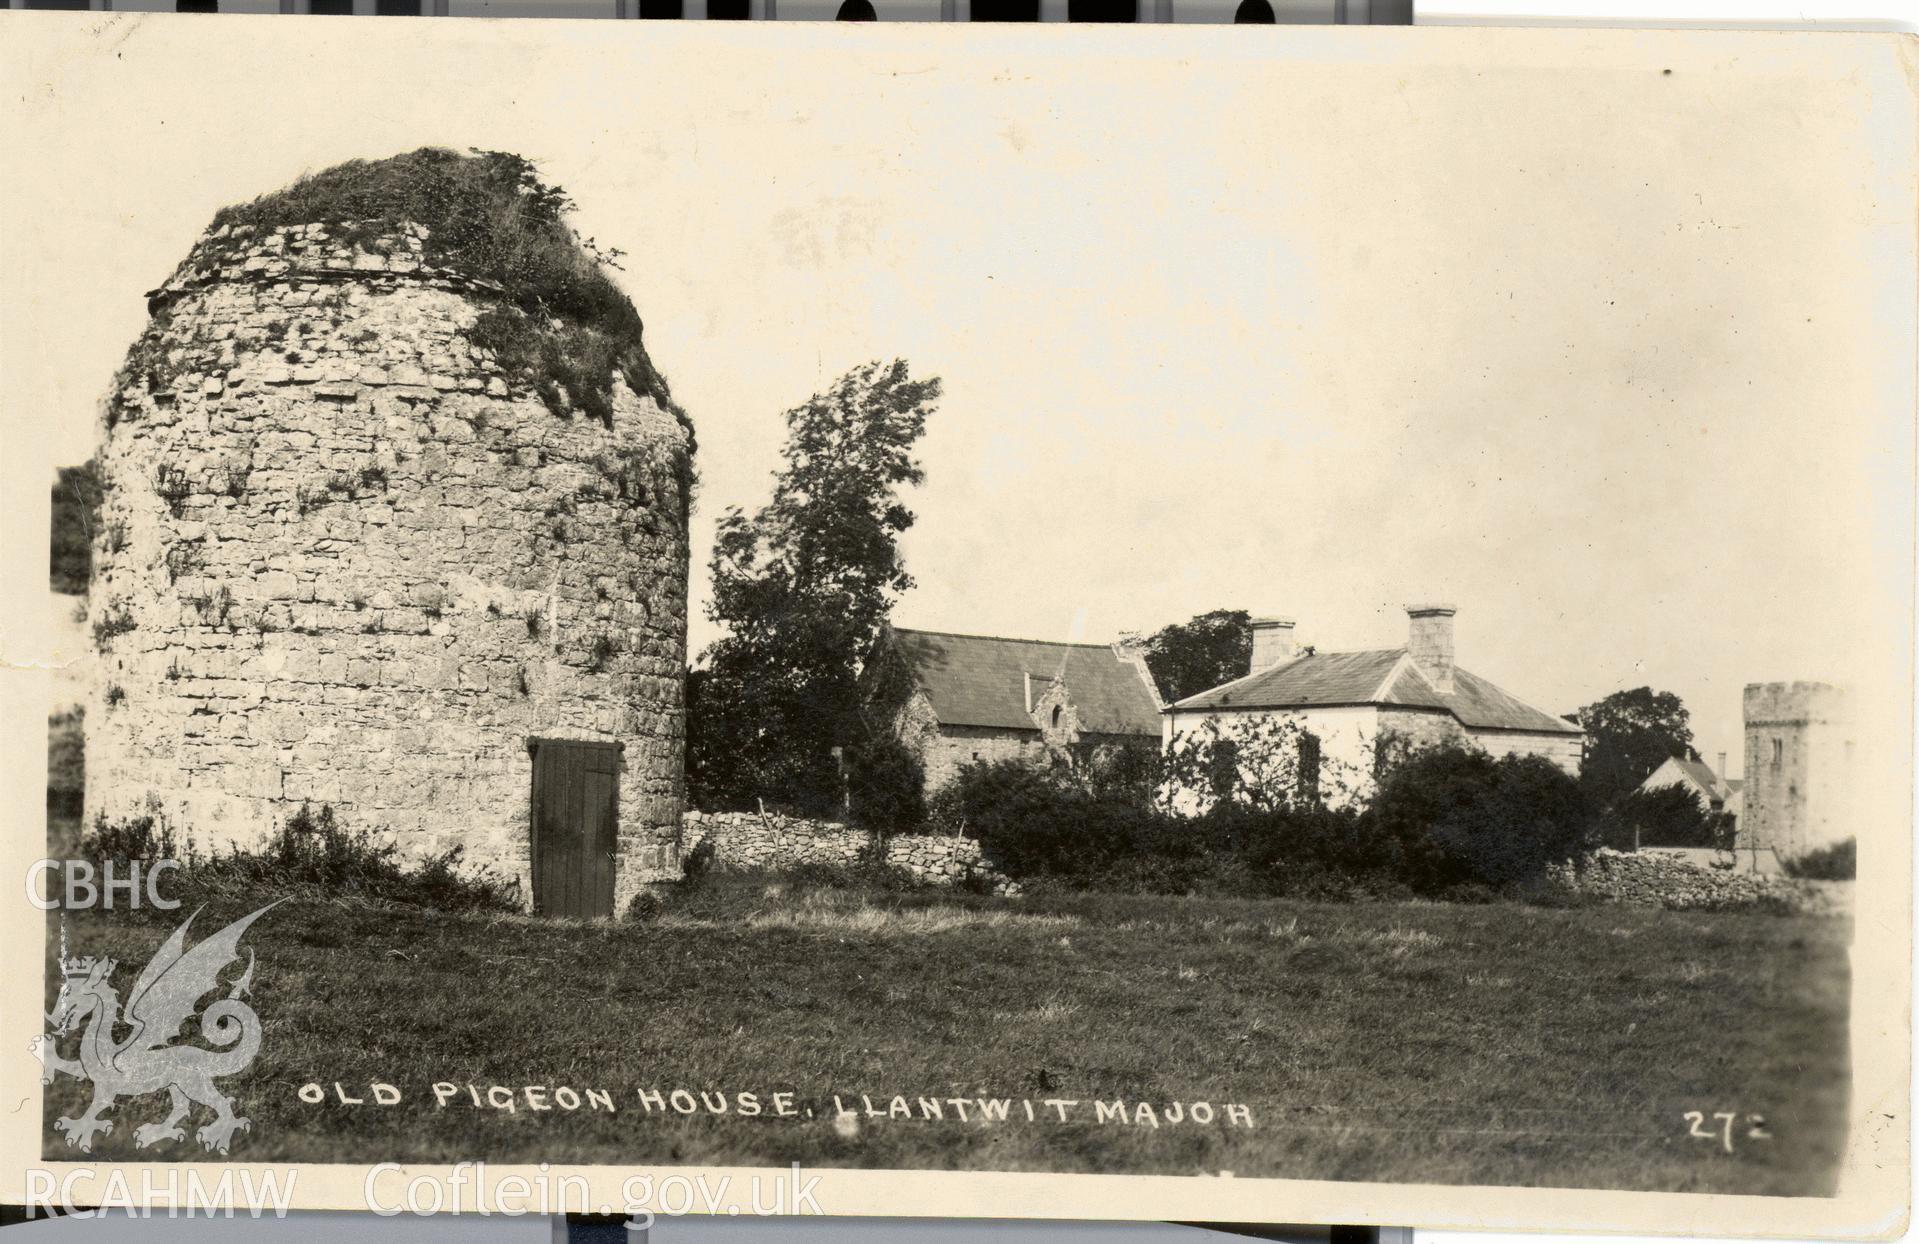 Digitised postcard image of Llantwit Major Grange, Dovecot, AW Bourne, 32 Babingley Drive, Leiceste. Produced by Parks and Gardens Data Services, from an original item in the Peter Davis Collection at Parks and Gardens UK. We hold only web-resolution images of this collection, suitable for viewing on screen and for research purposes only. We do not hold the original images, or publication quality scans.